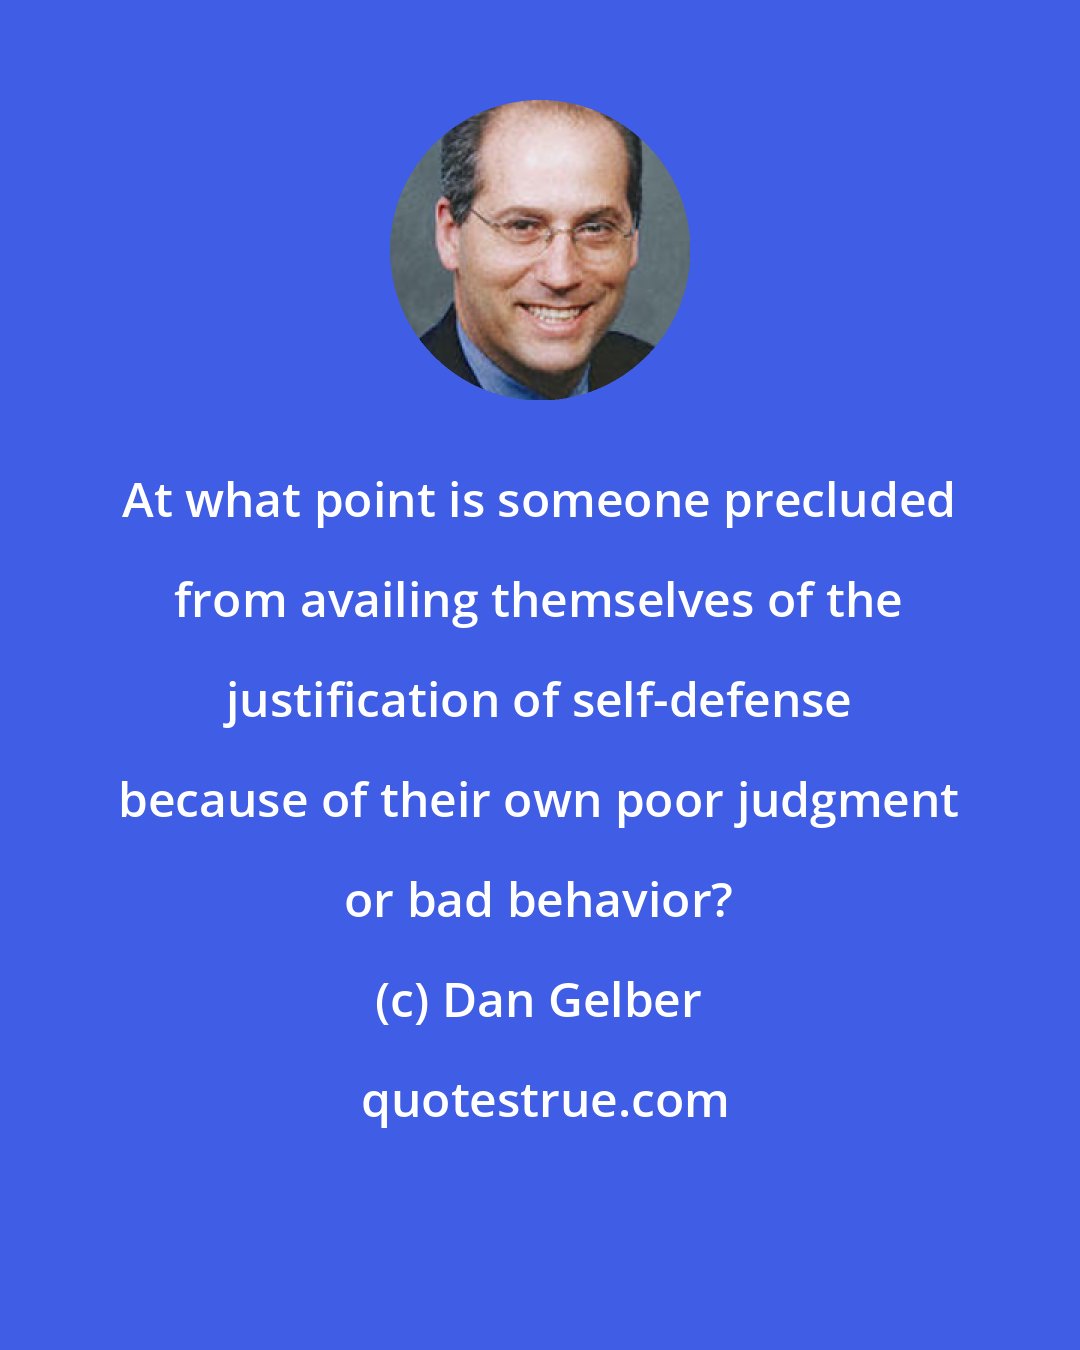 Dan Gelber: At what point is someone precluded from availing themselves of the justification of self-defense because of their own poor judgment or bad behavior?